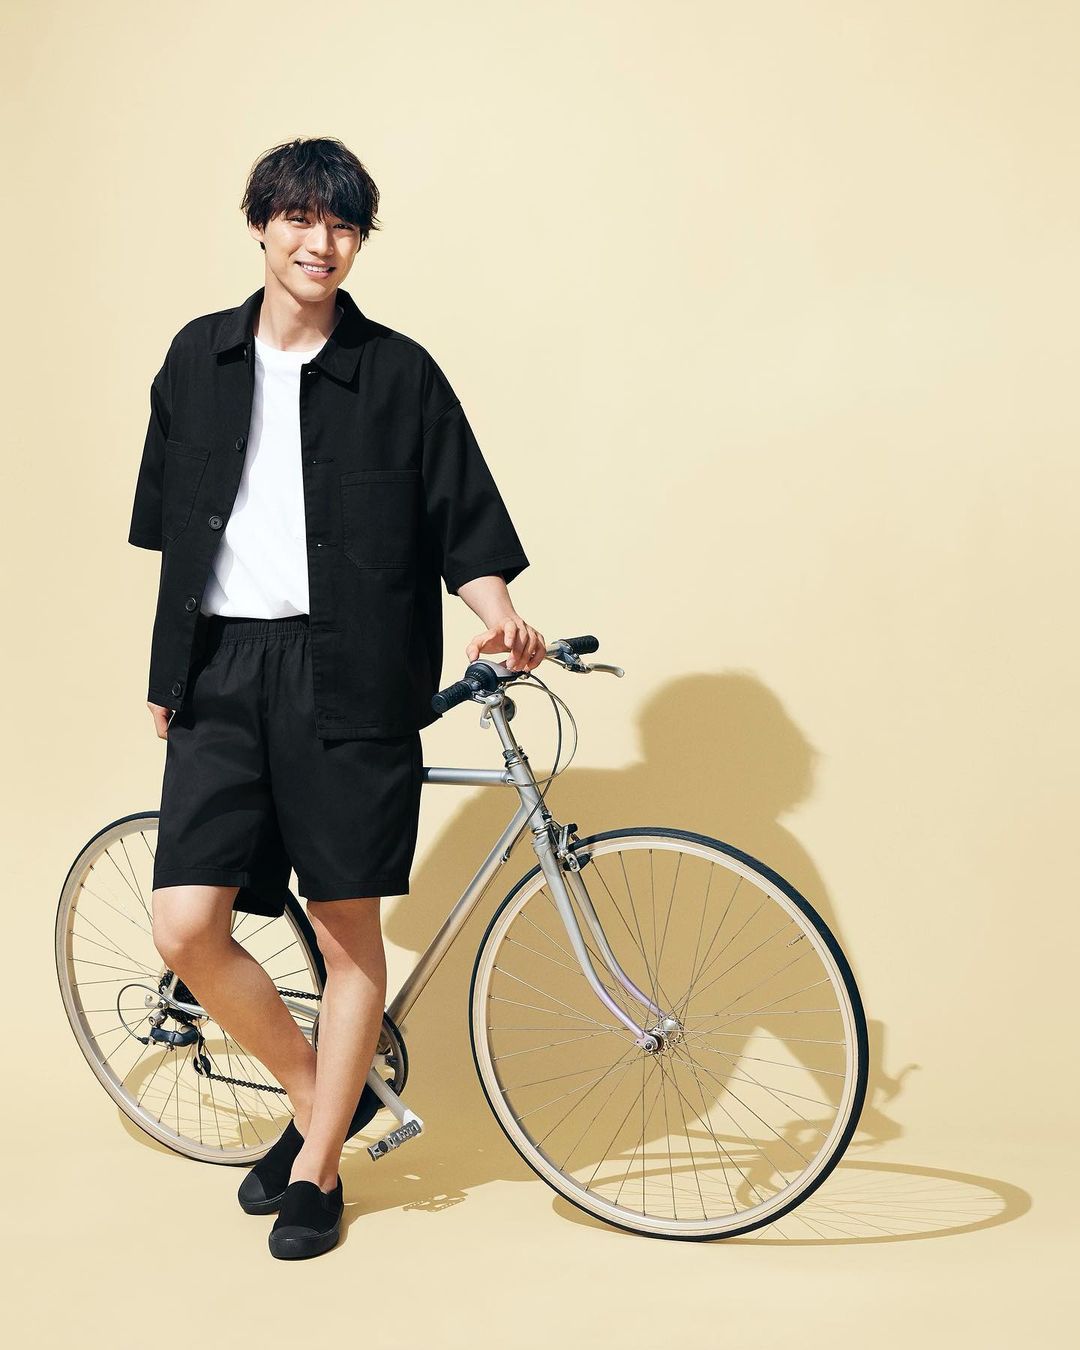 Souta Fukushi Pictures For May 21, 2021